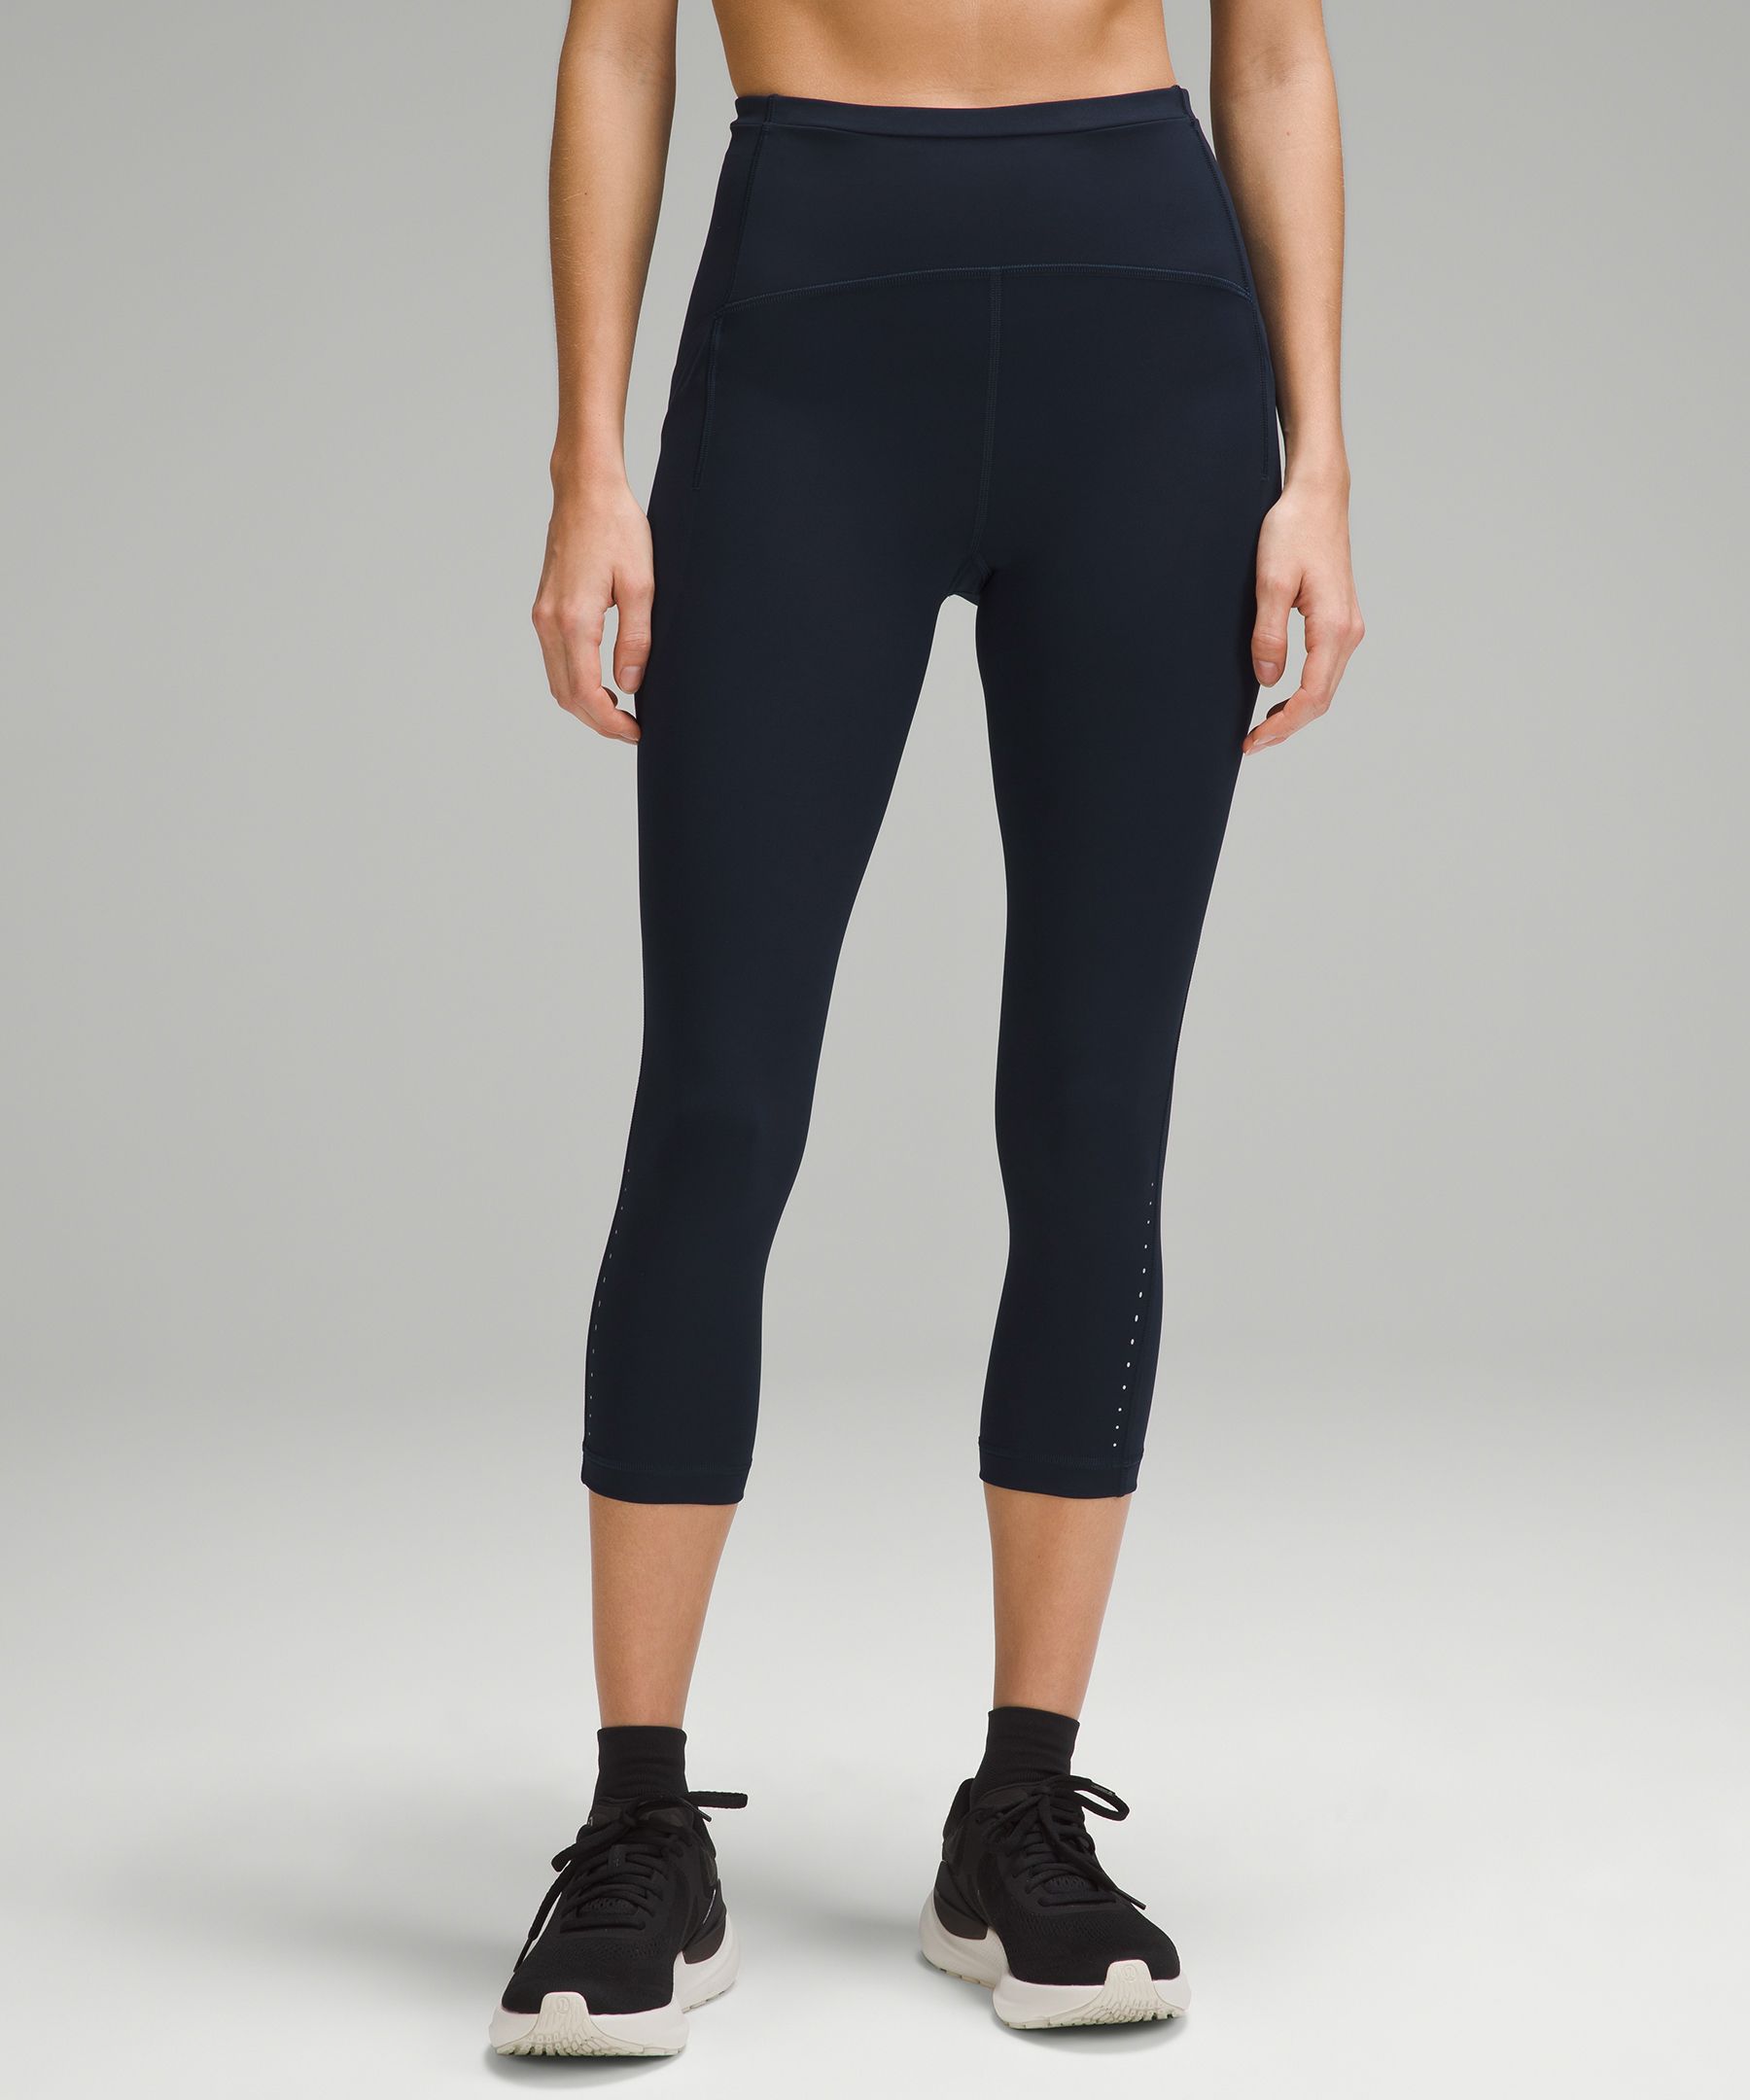 how to get lululemon cheap